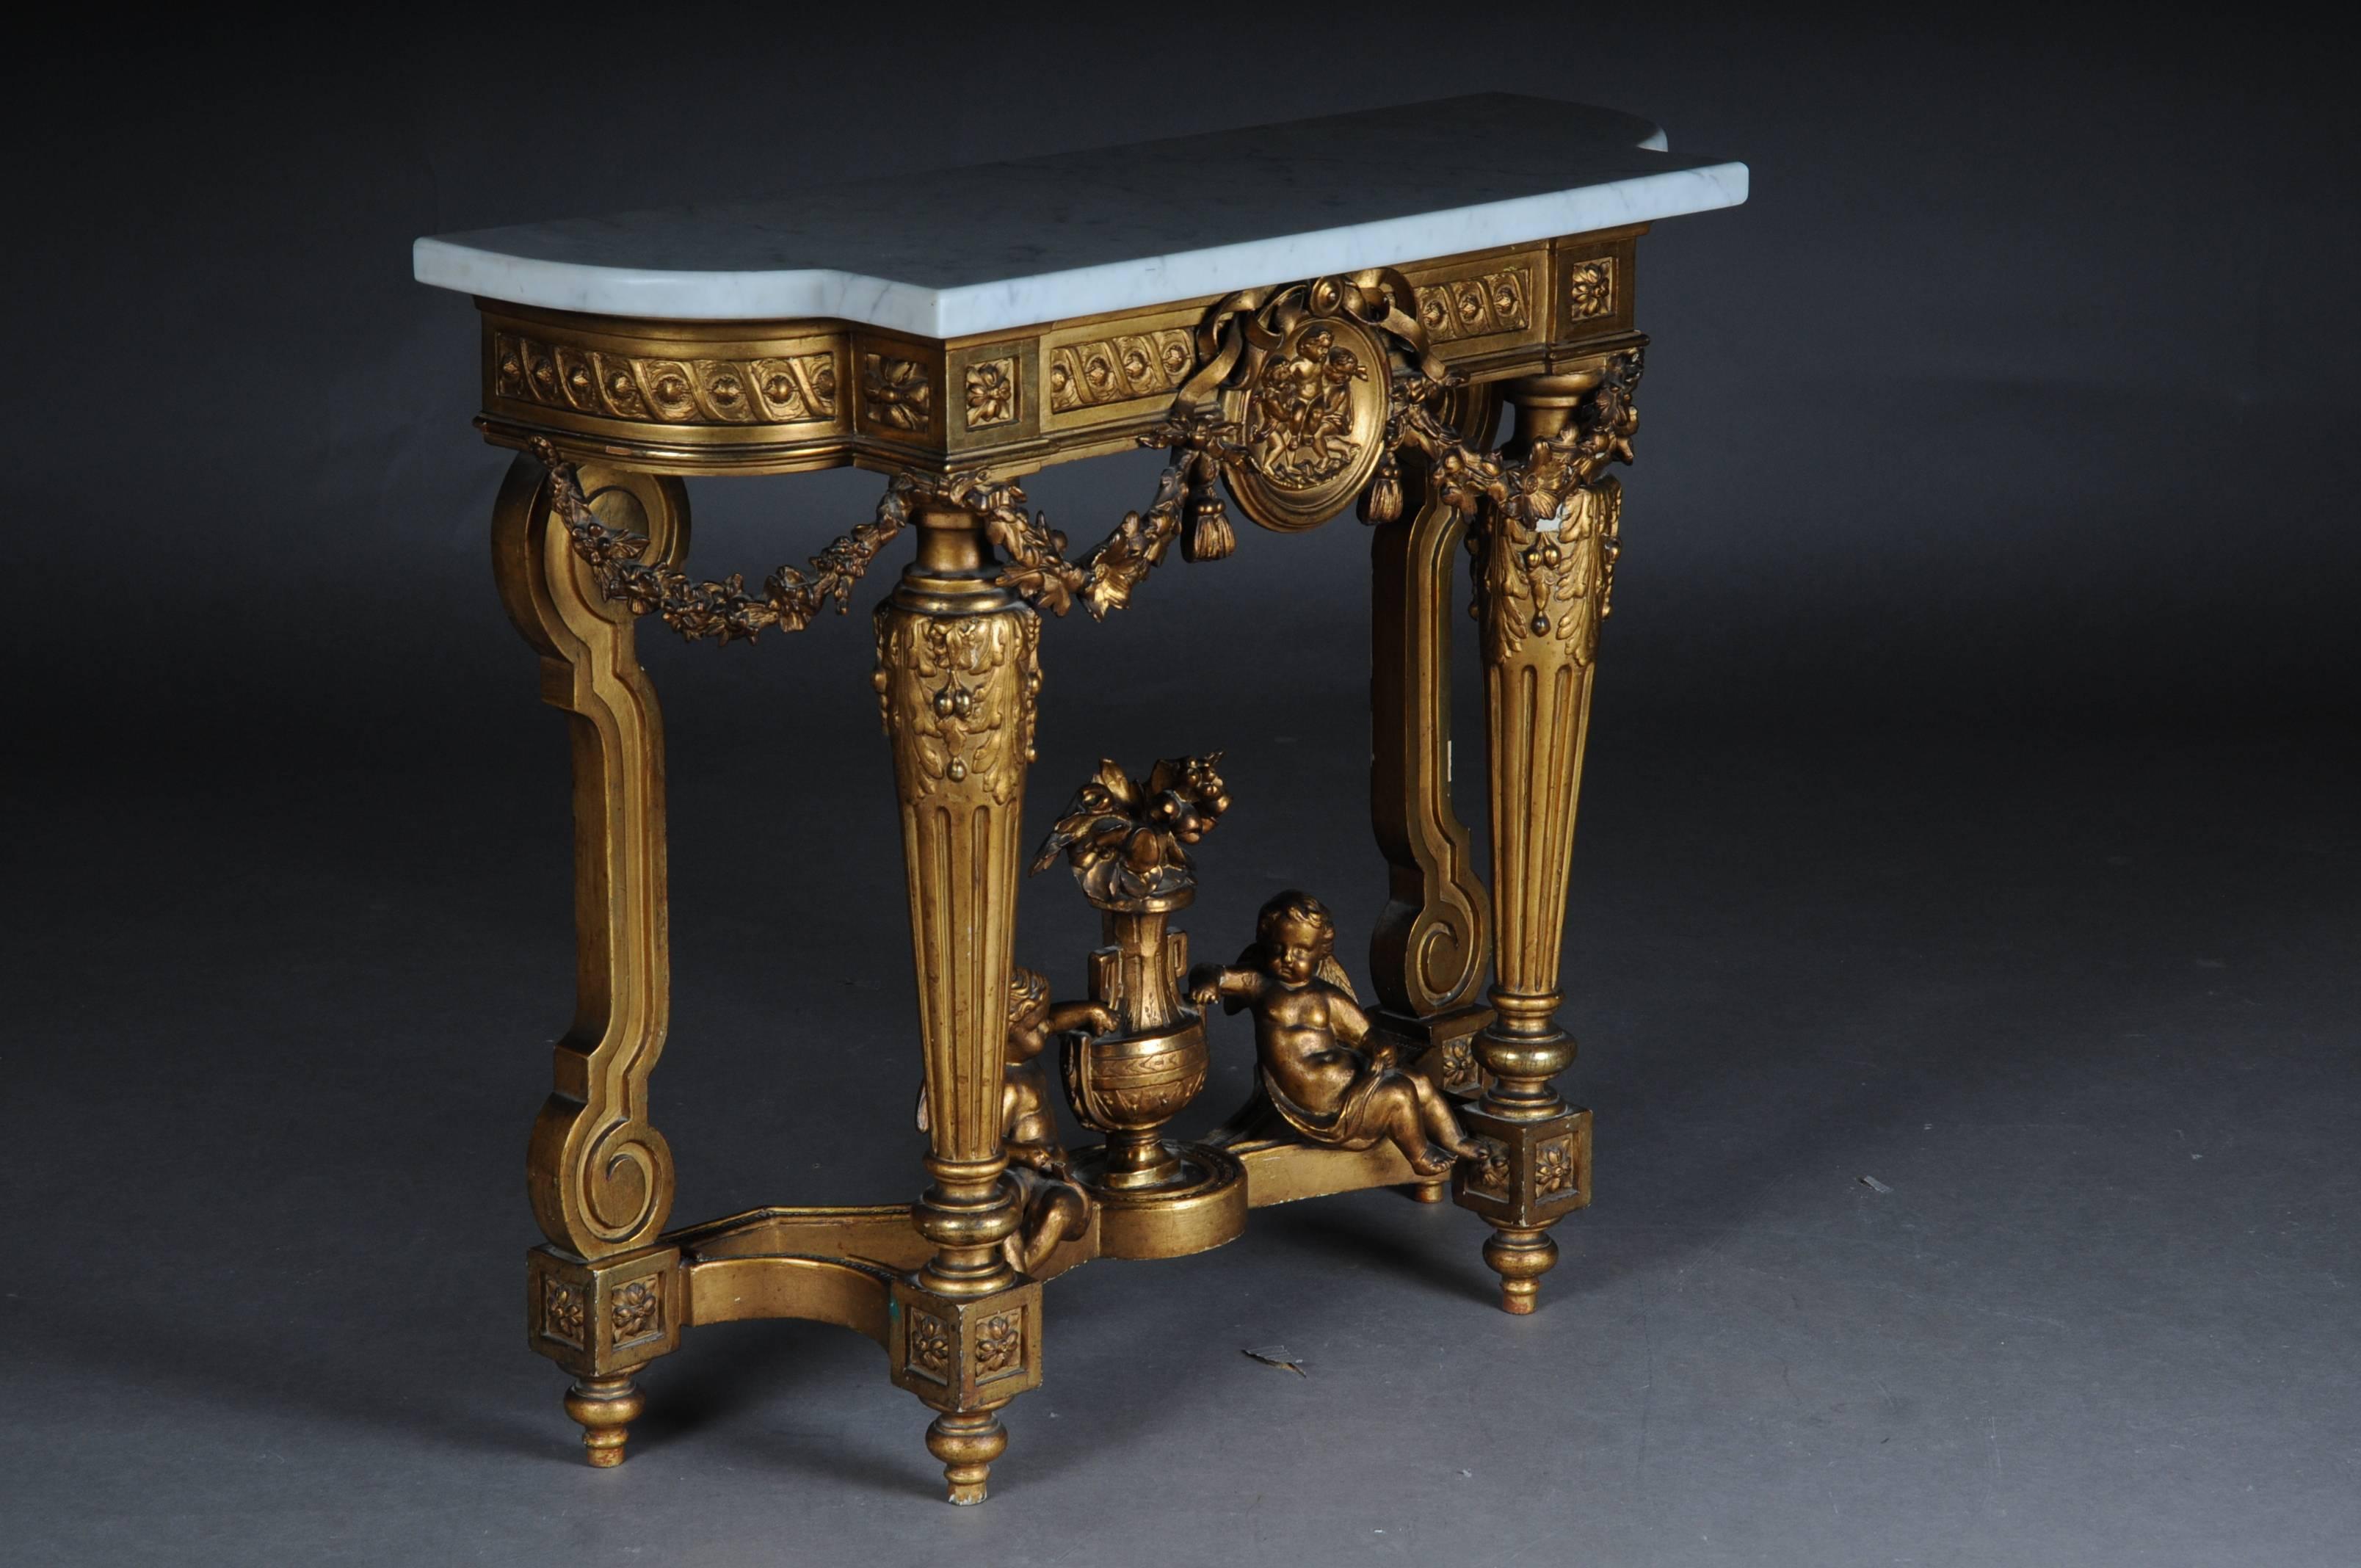 Hand-Carved Antique French Splendor Console Table, circa 1860